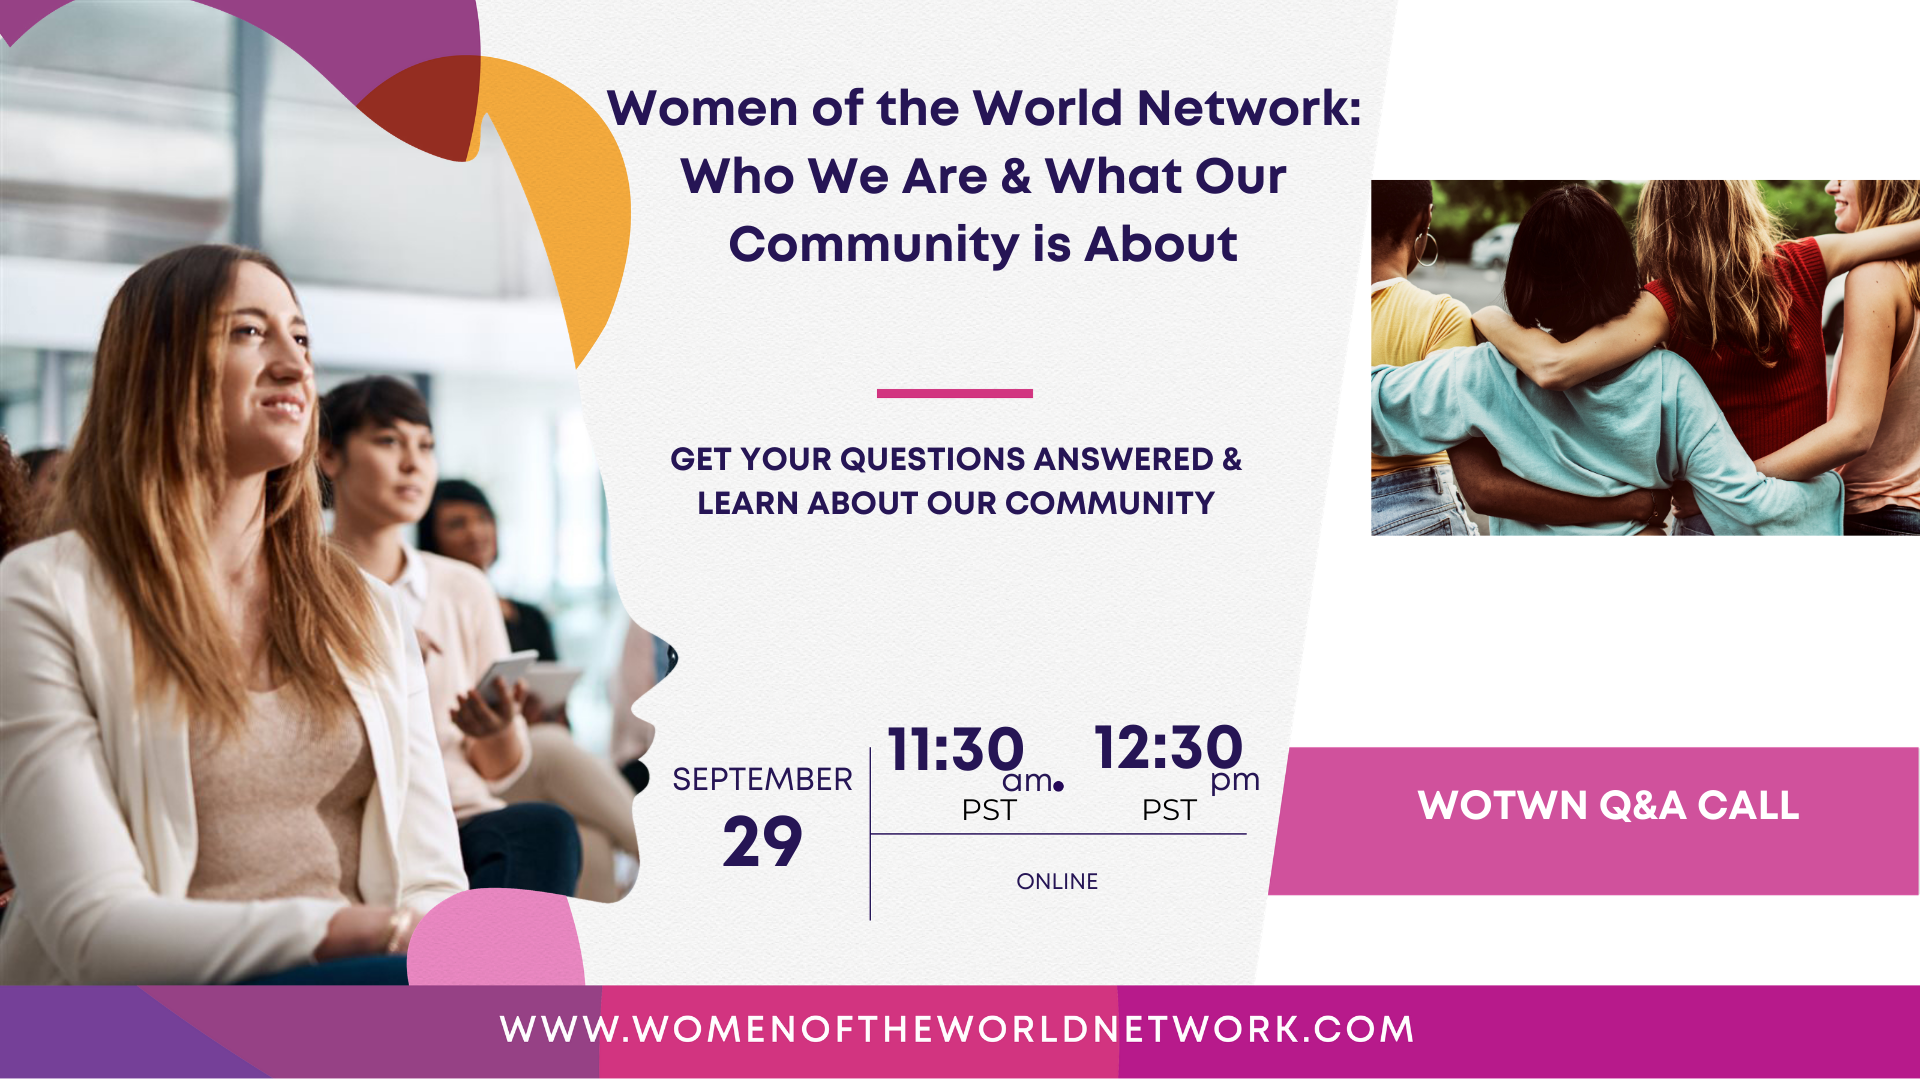 Women of the World Network: Who We Are and What Our Community is About